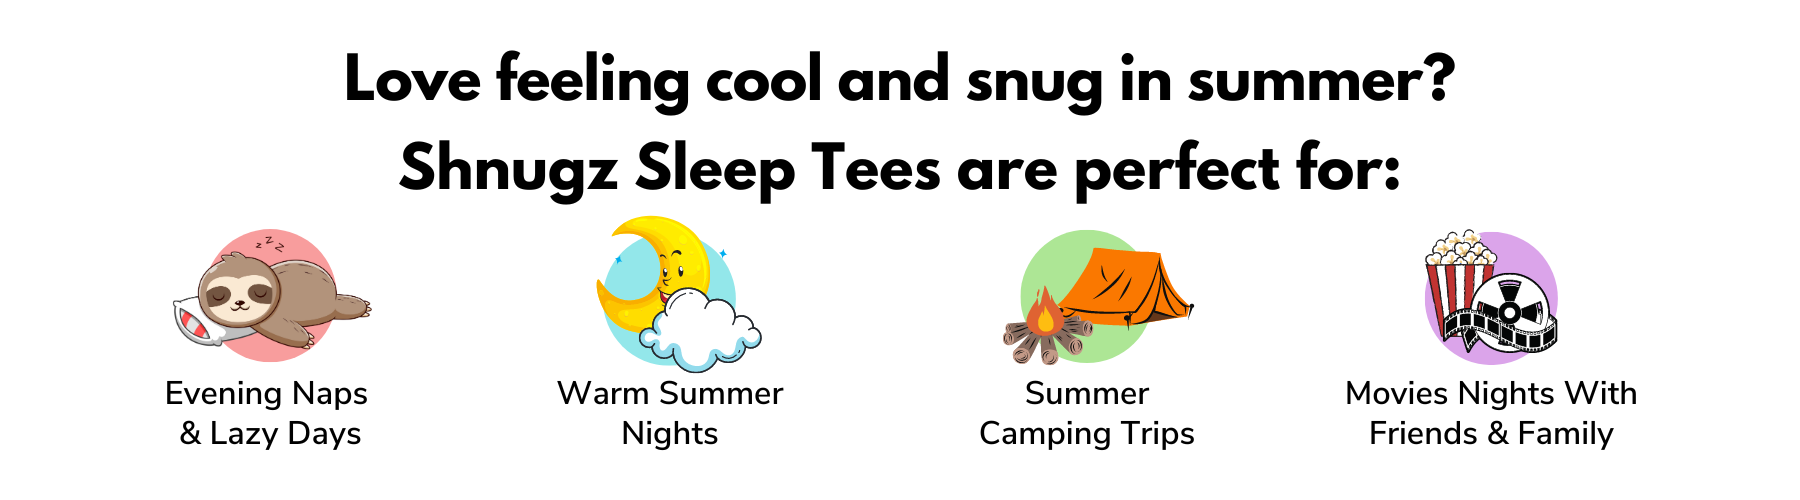 Love feeling cool and snug in summer? Shnugz Sleep Tees are perfect for: evening naps or lazy days, warm summer night, summer camping trips, watching movies with friends 